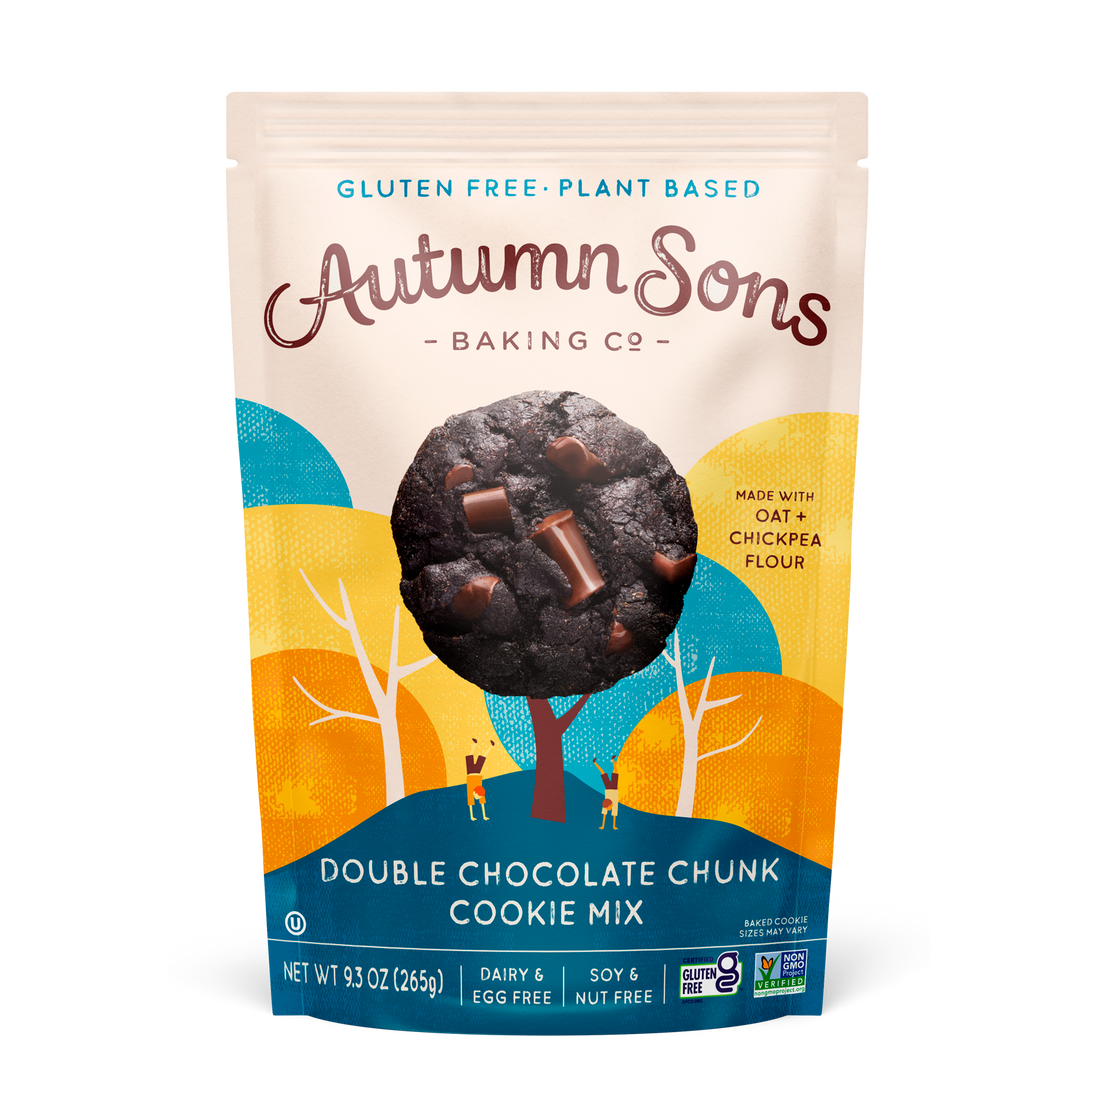 Double Chocolate Chunk Cookie Mix